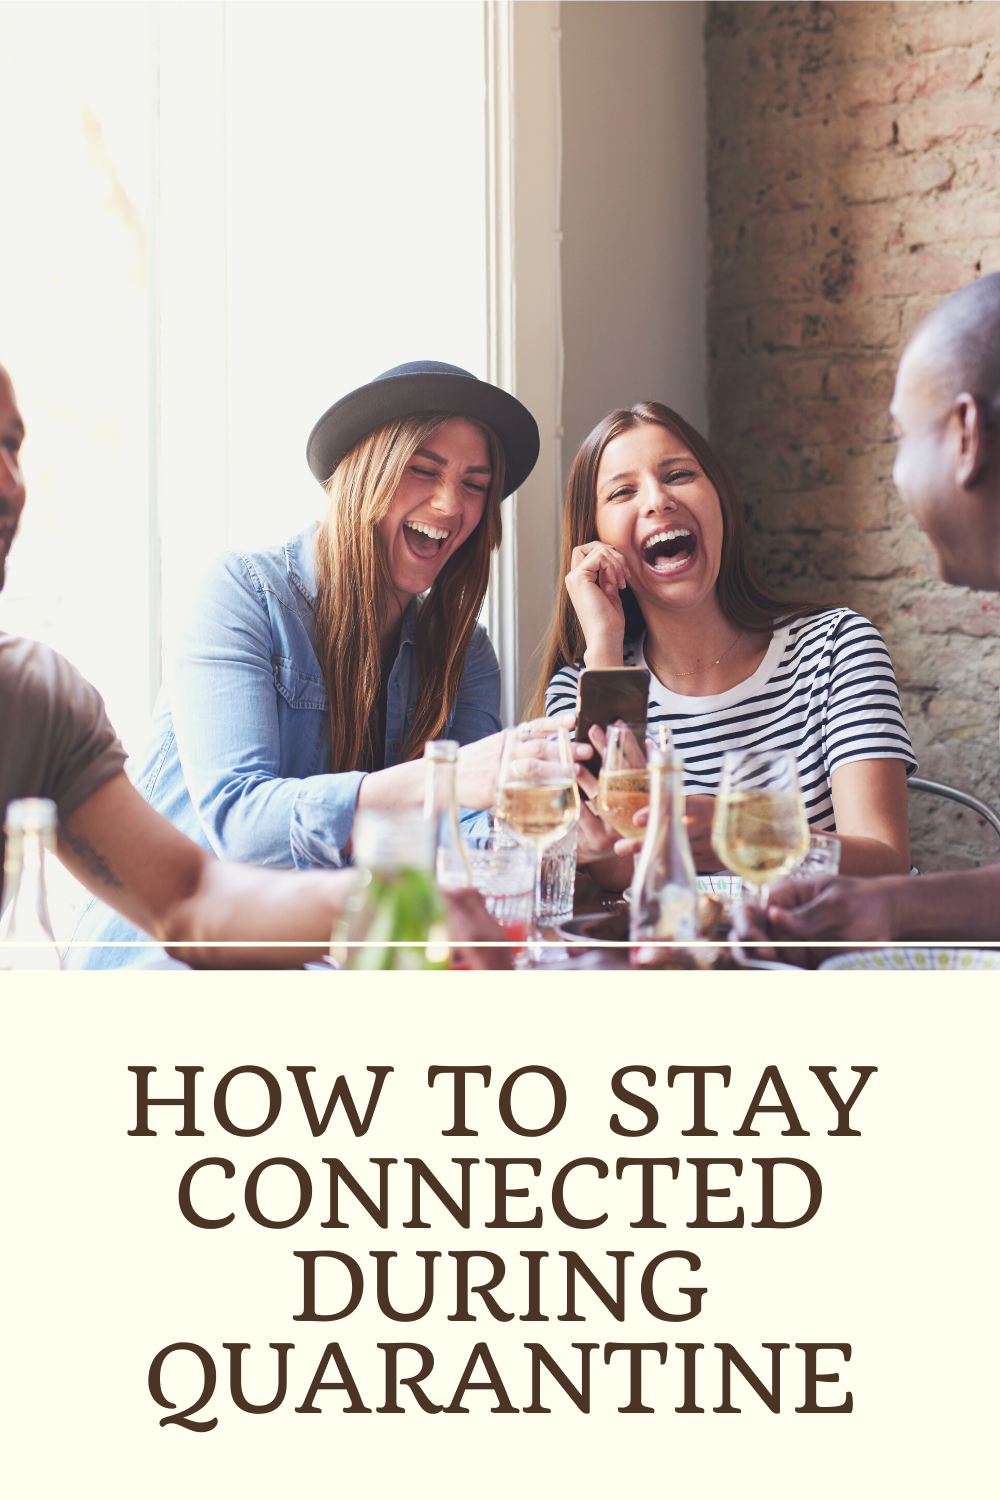 How To Stay Connected During Quarantine